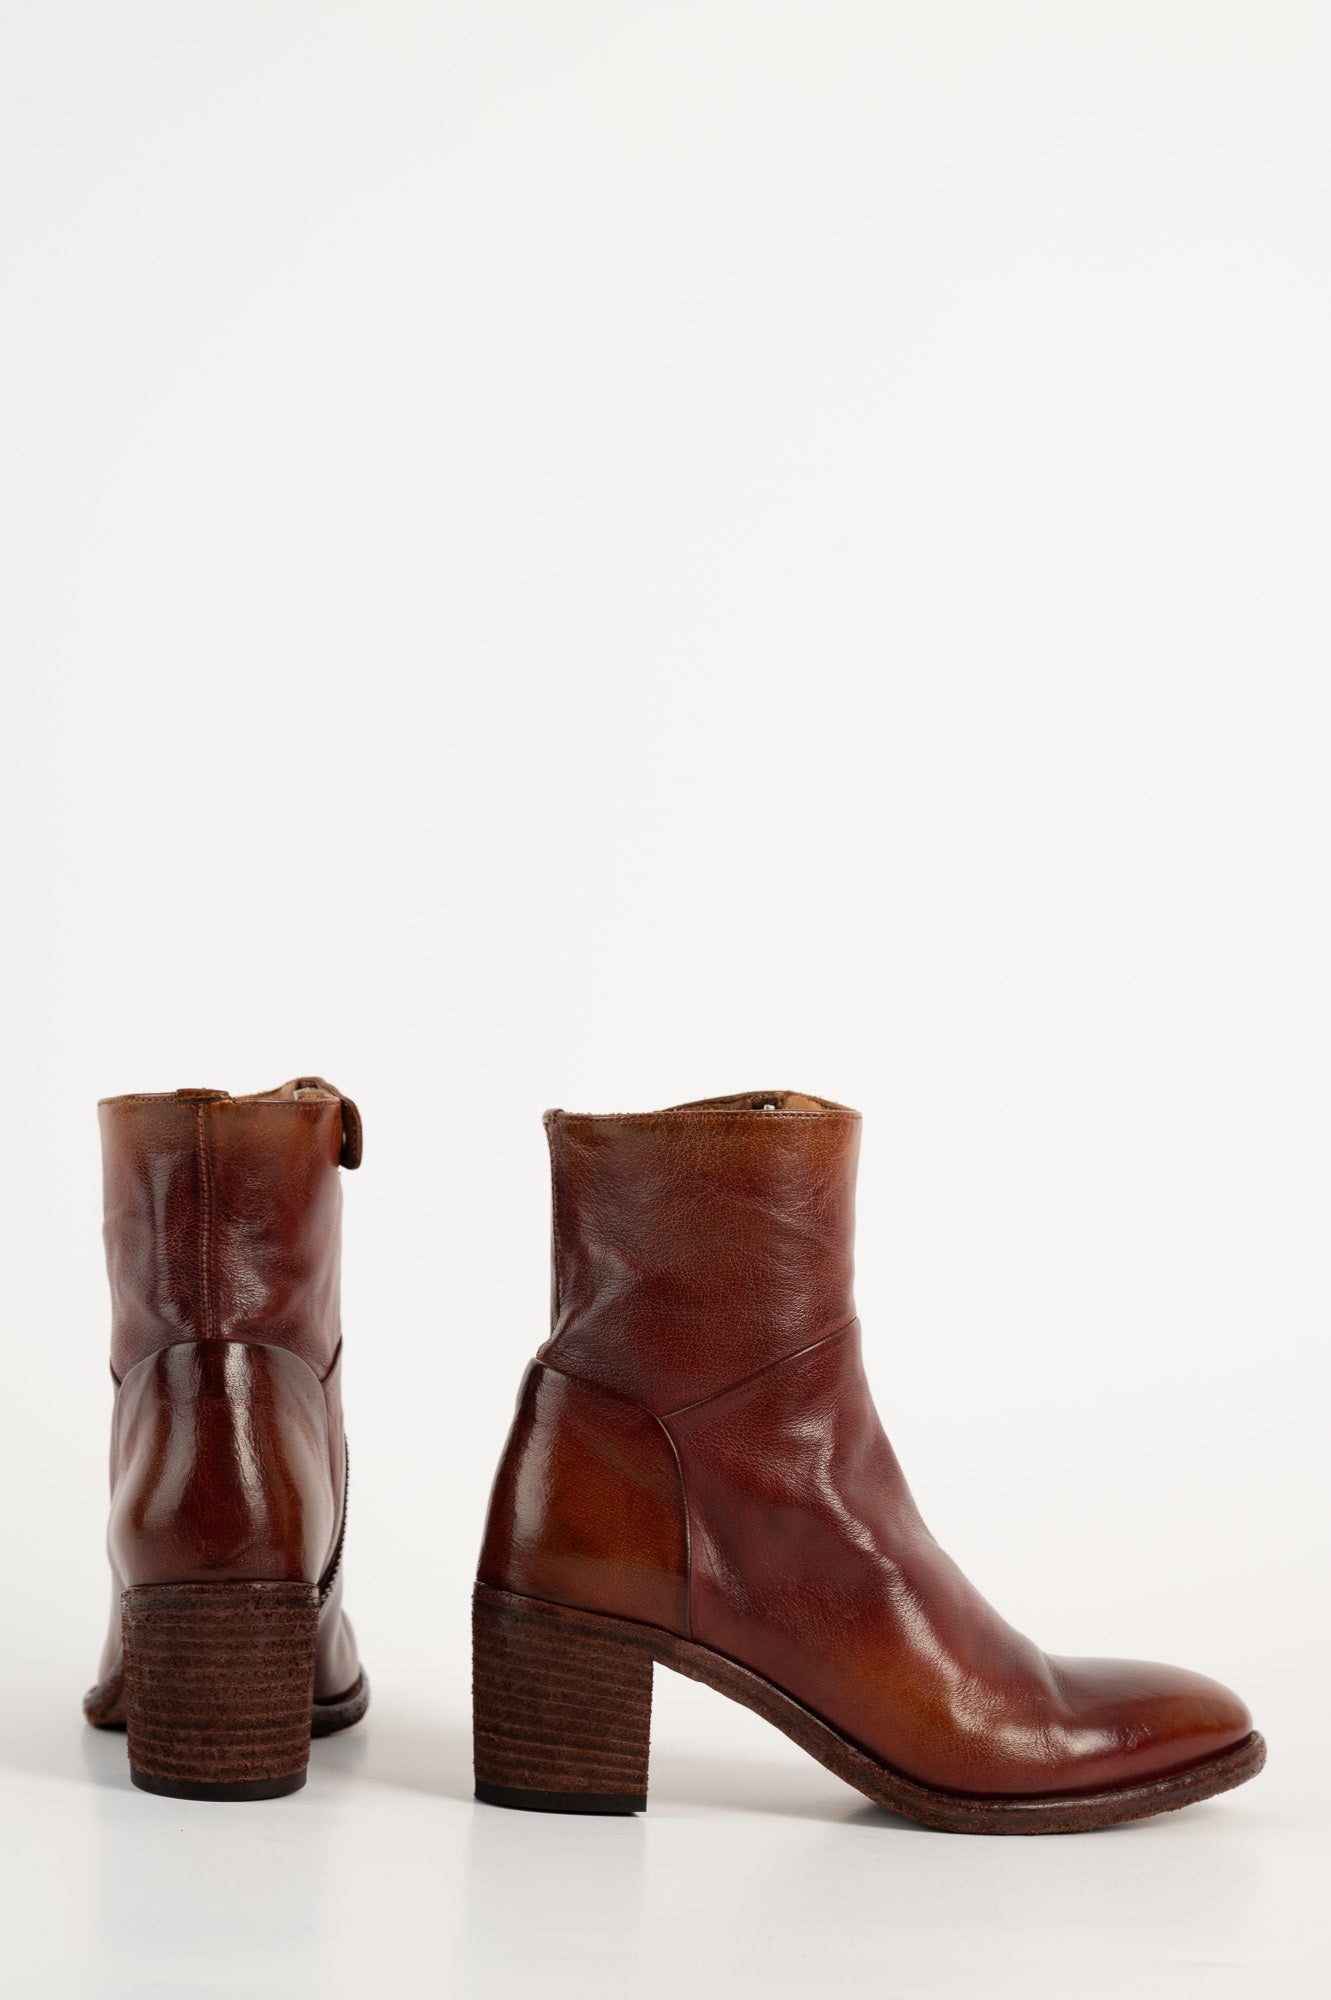 Ankle Boot Sarah 003 | Red Leather